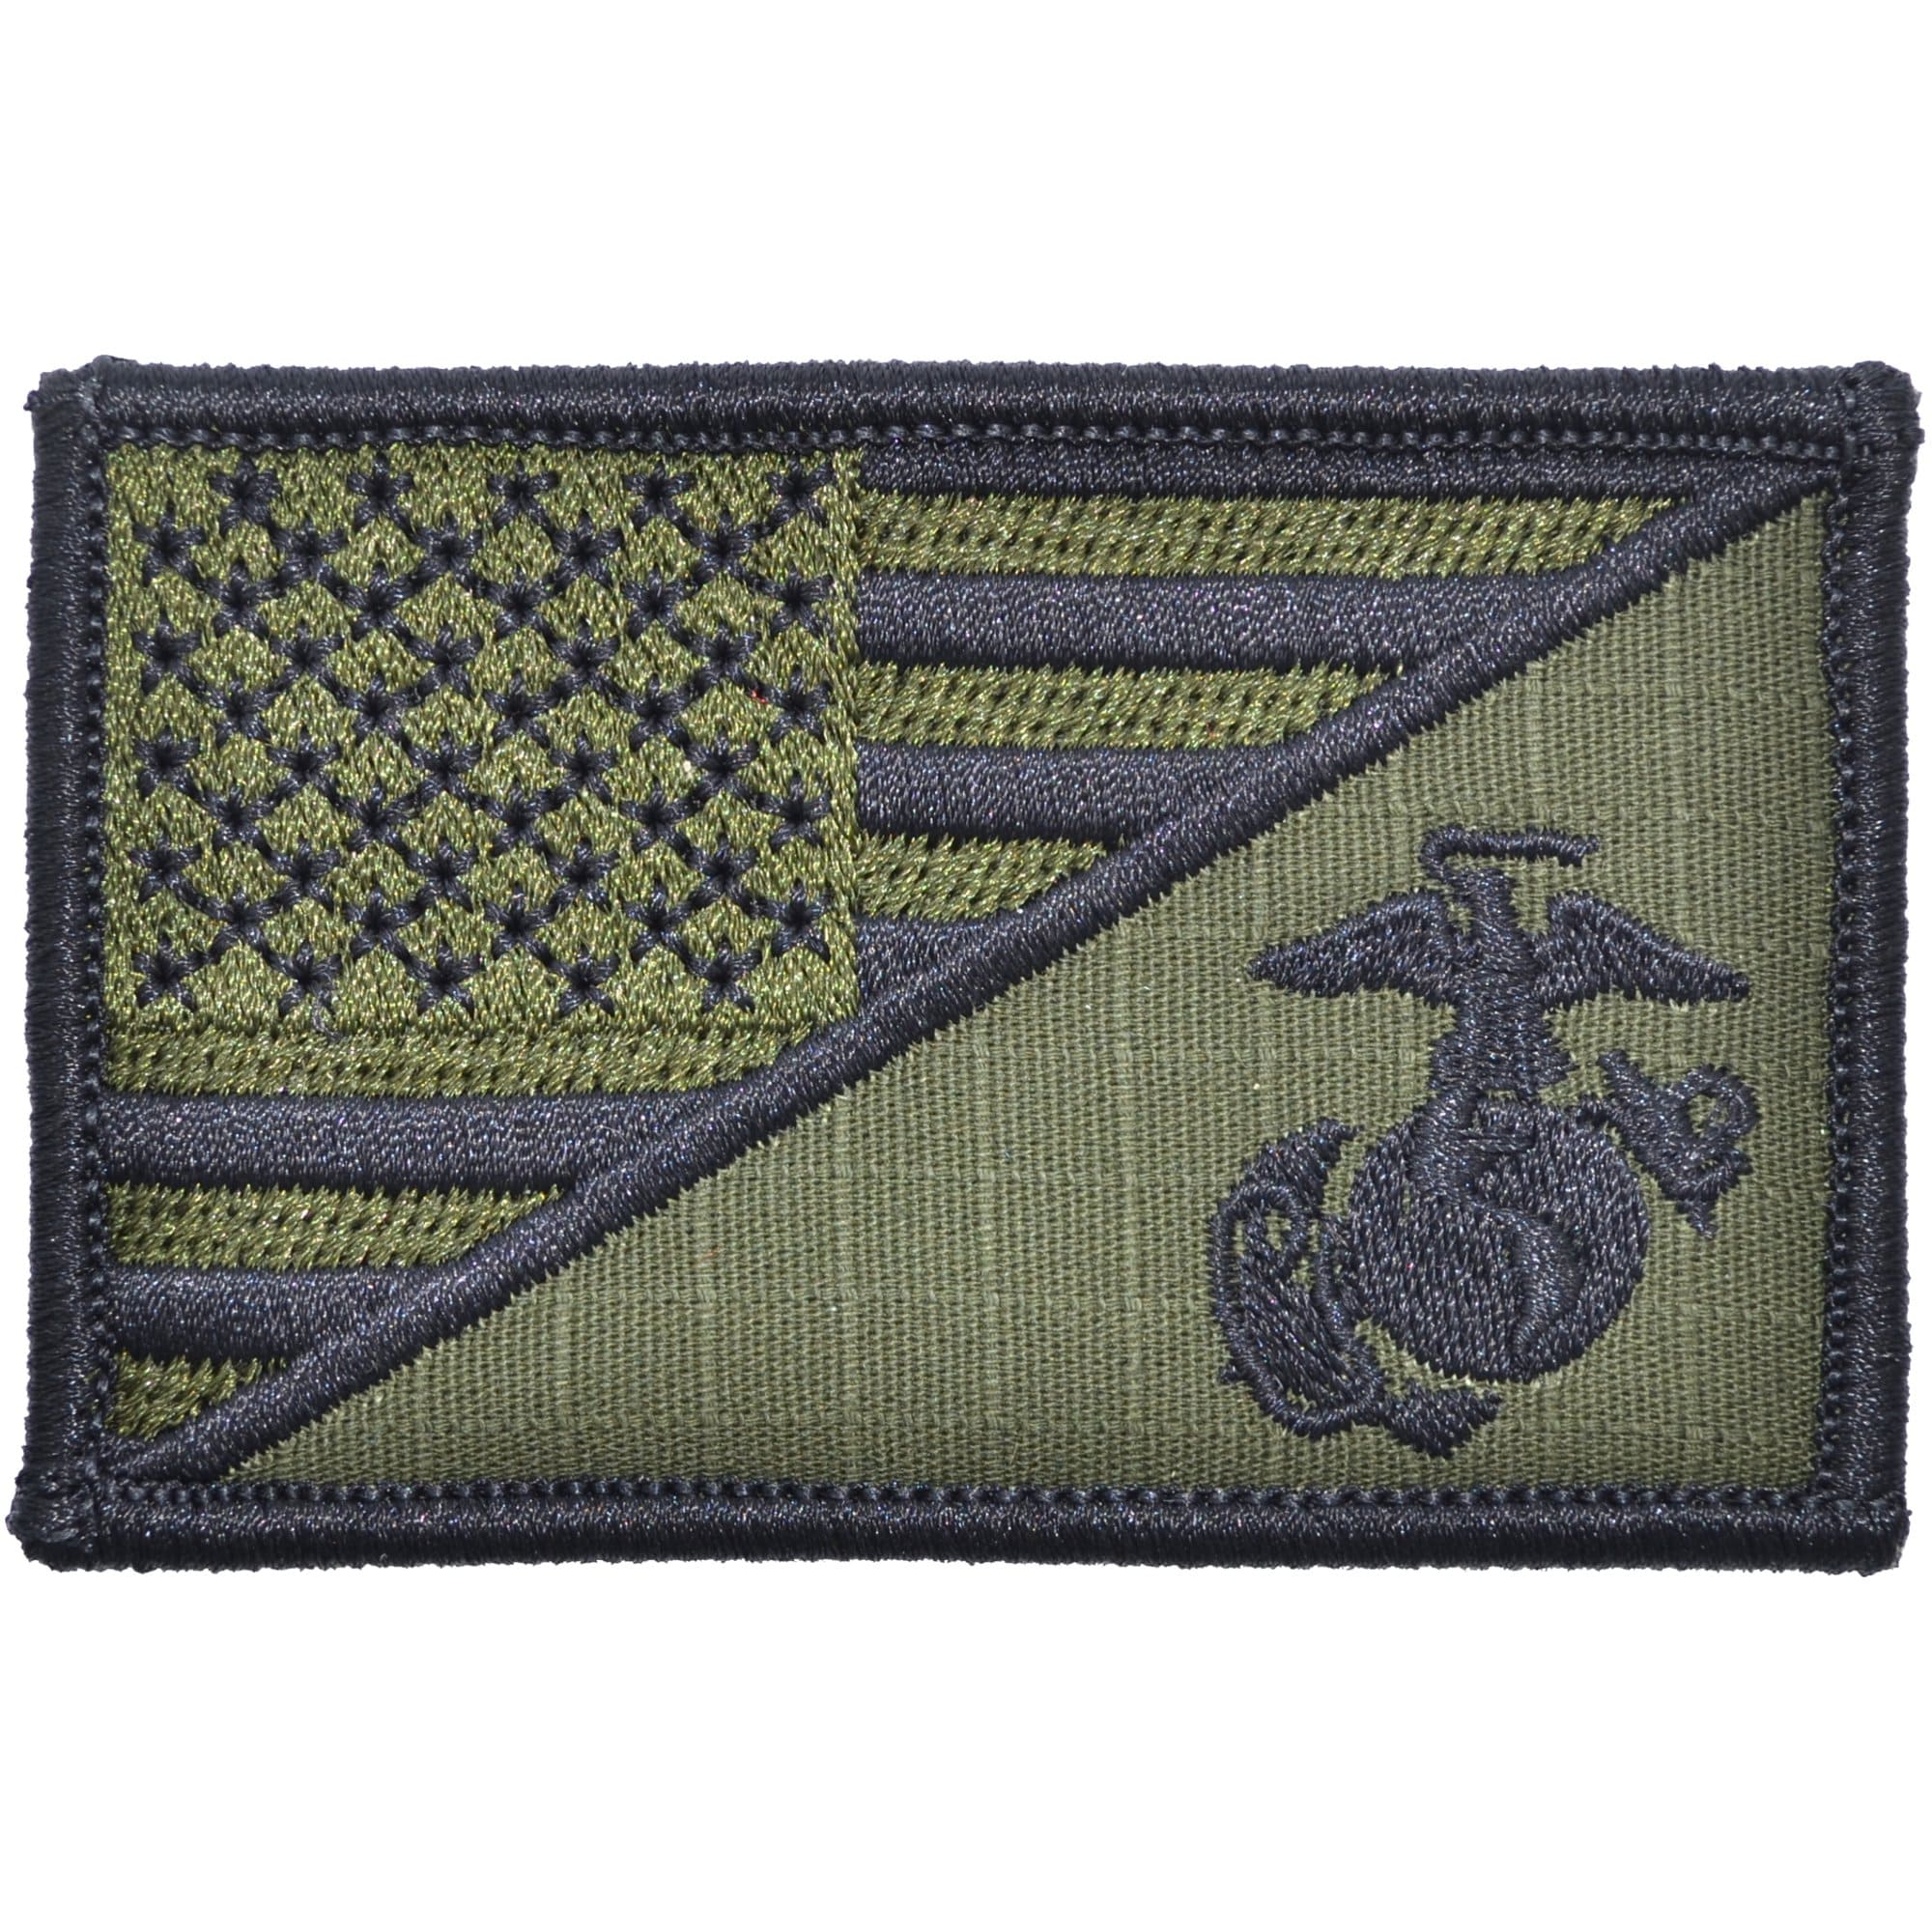 Tactical Gear Junkie Patches Olive Drab USMC EGA USA Flag - 2.25x3.5 Patch